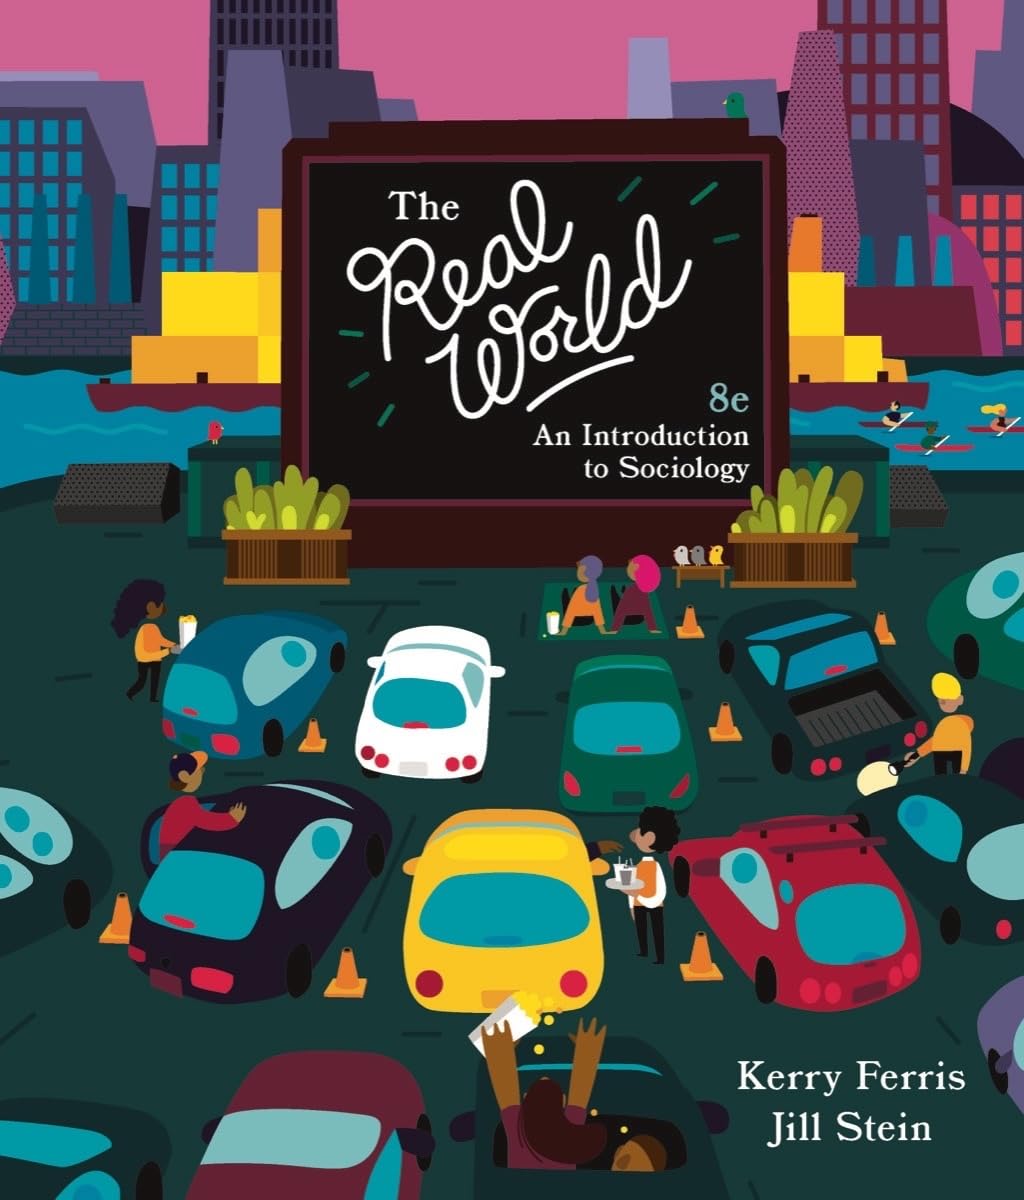 Cover Image - The real world by ferris practice test bank & exam questions